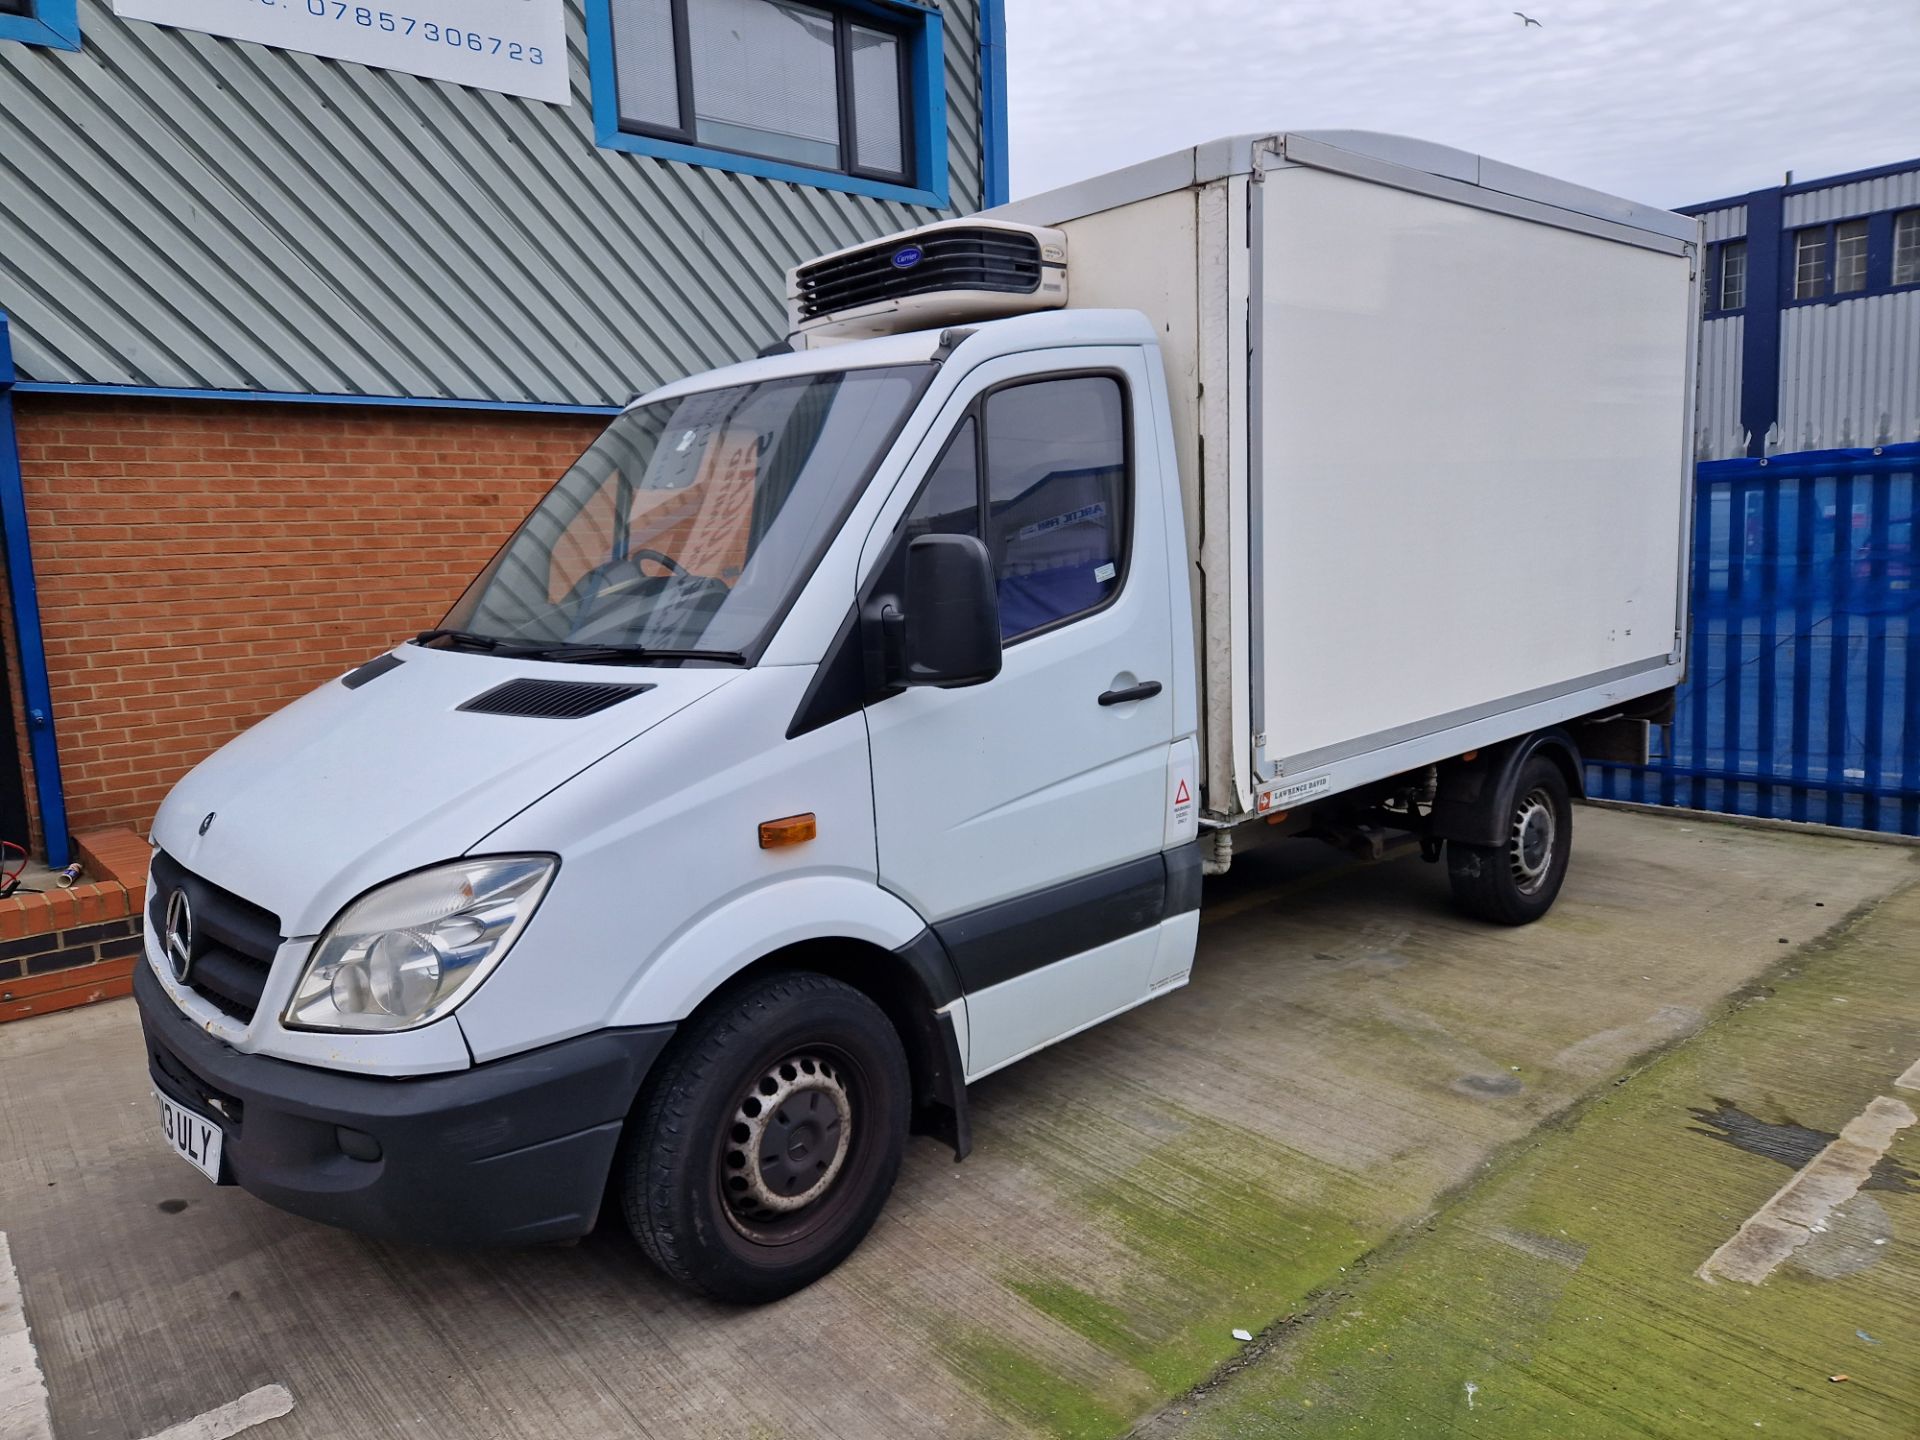 Mercedes Benz Sprinter 313 CDi Refrigerated Box Van, registration no. PO13 ULY, date first - Image 3 of 8